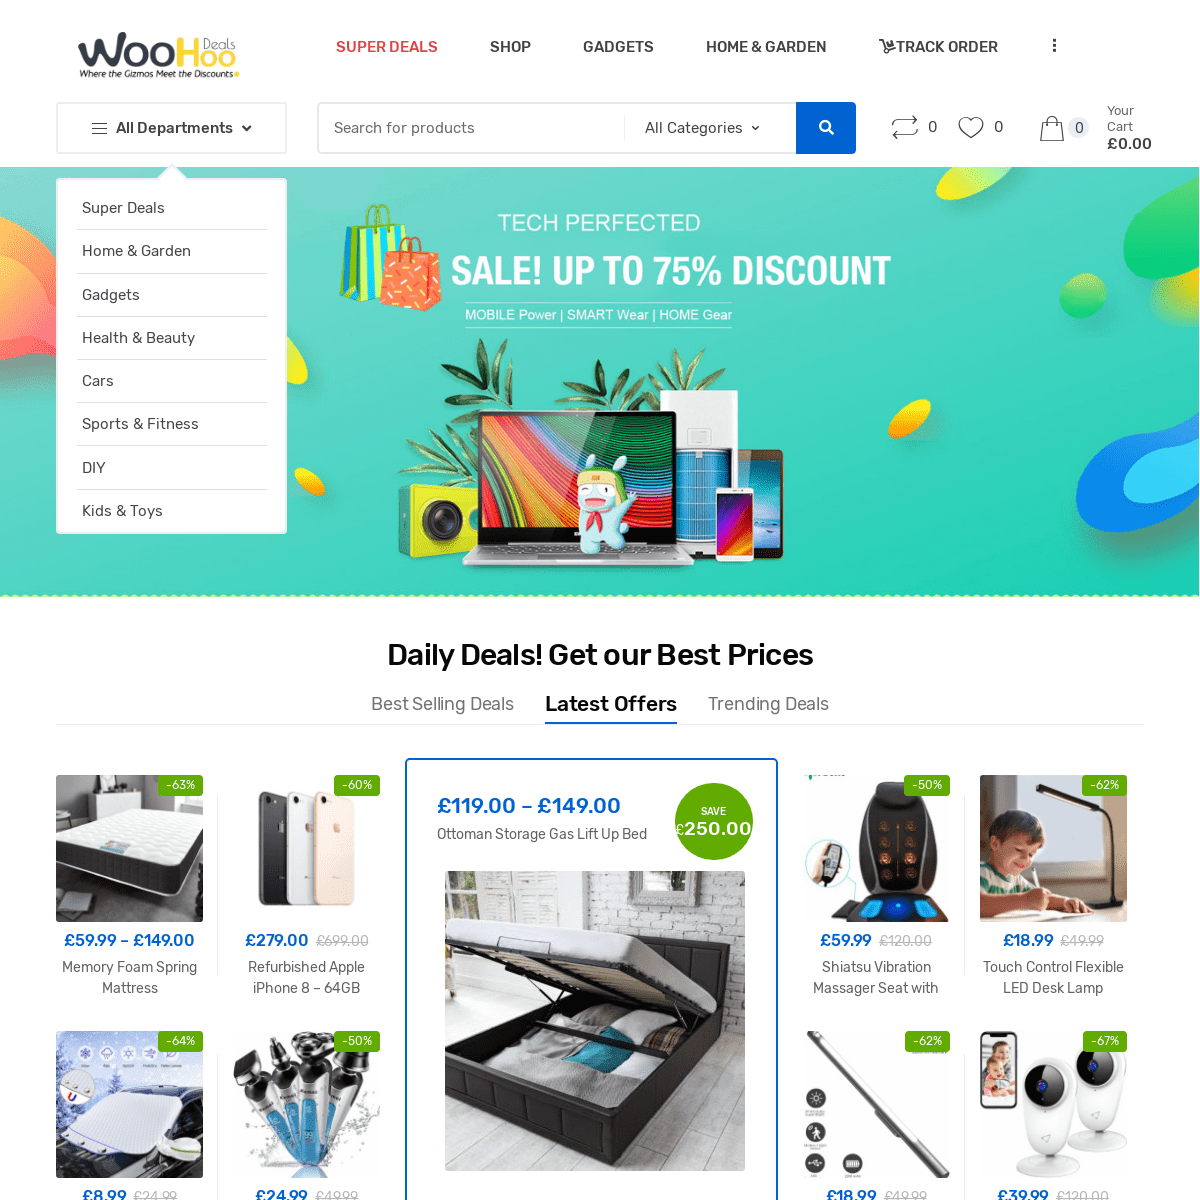 A complete backup of woohoodeal.co.uk